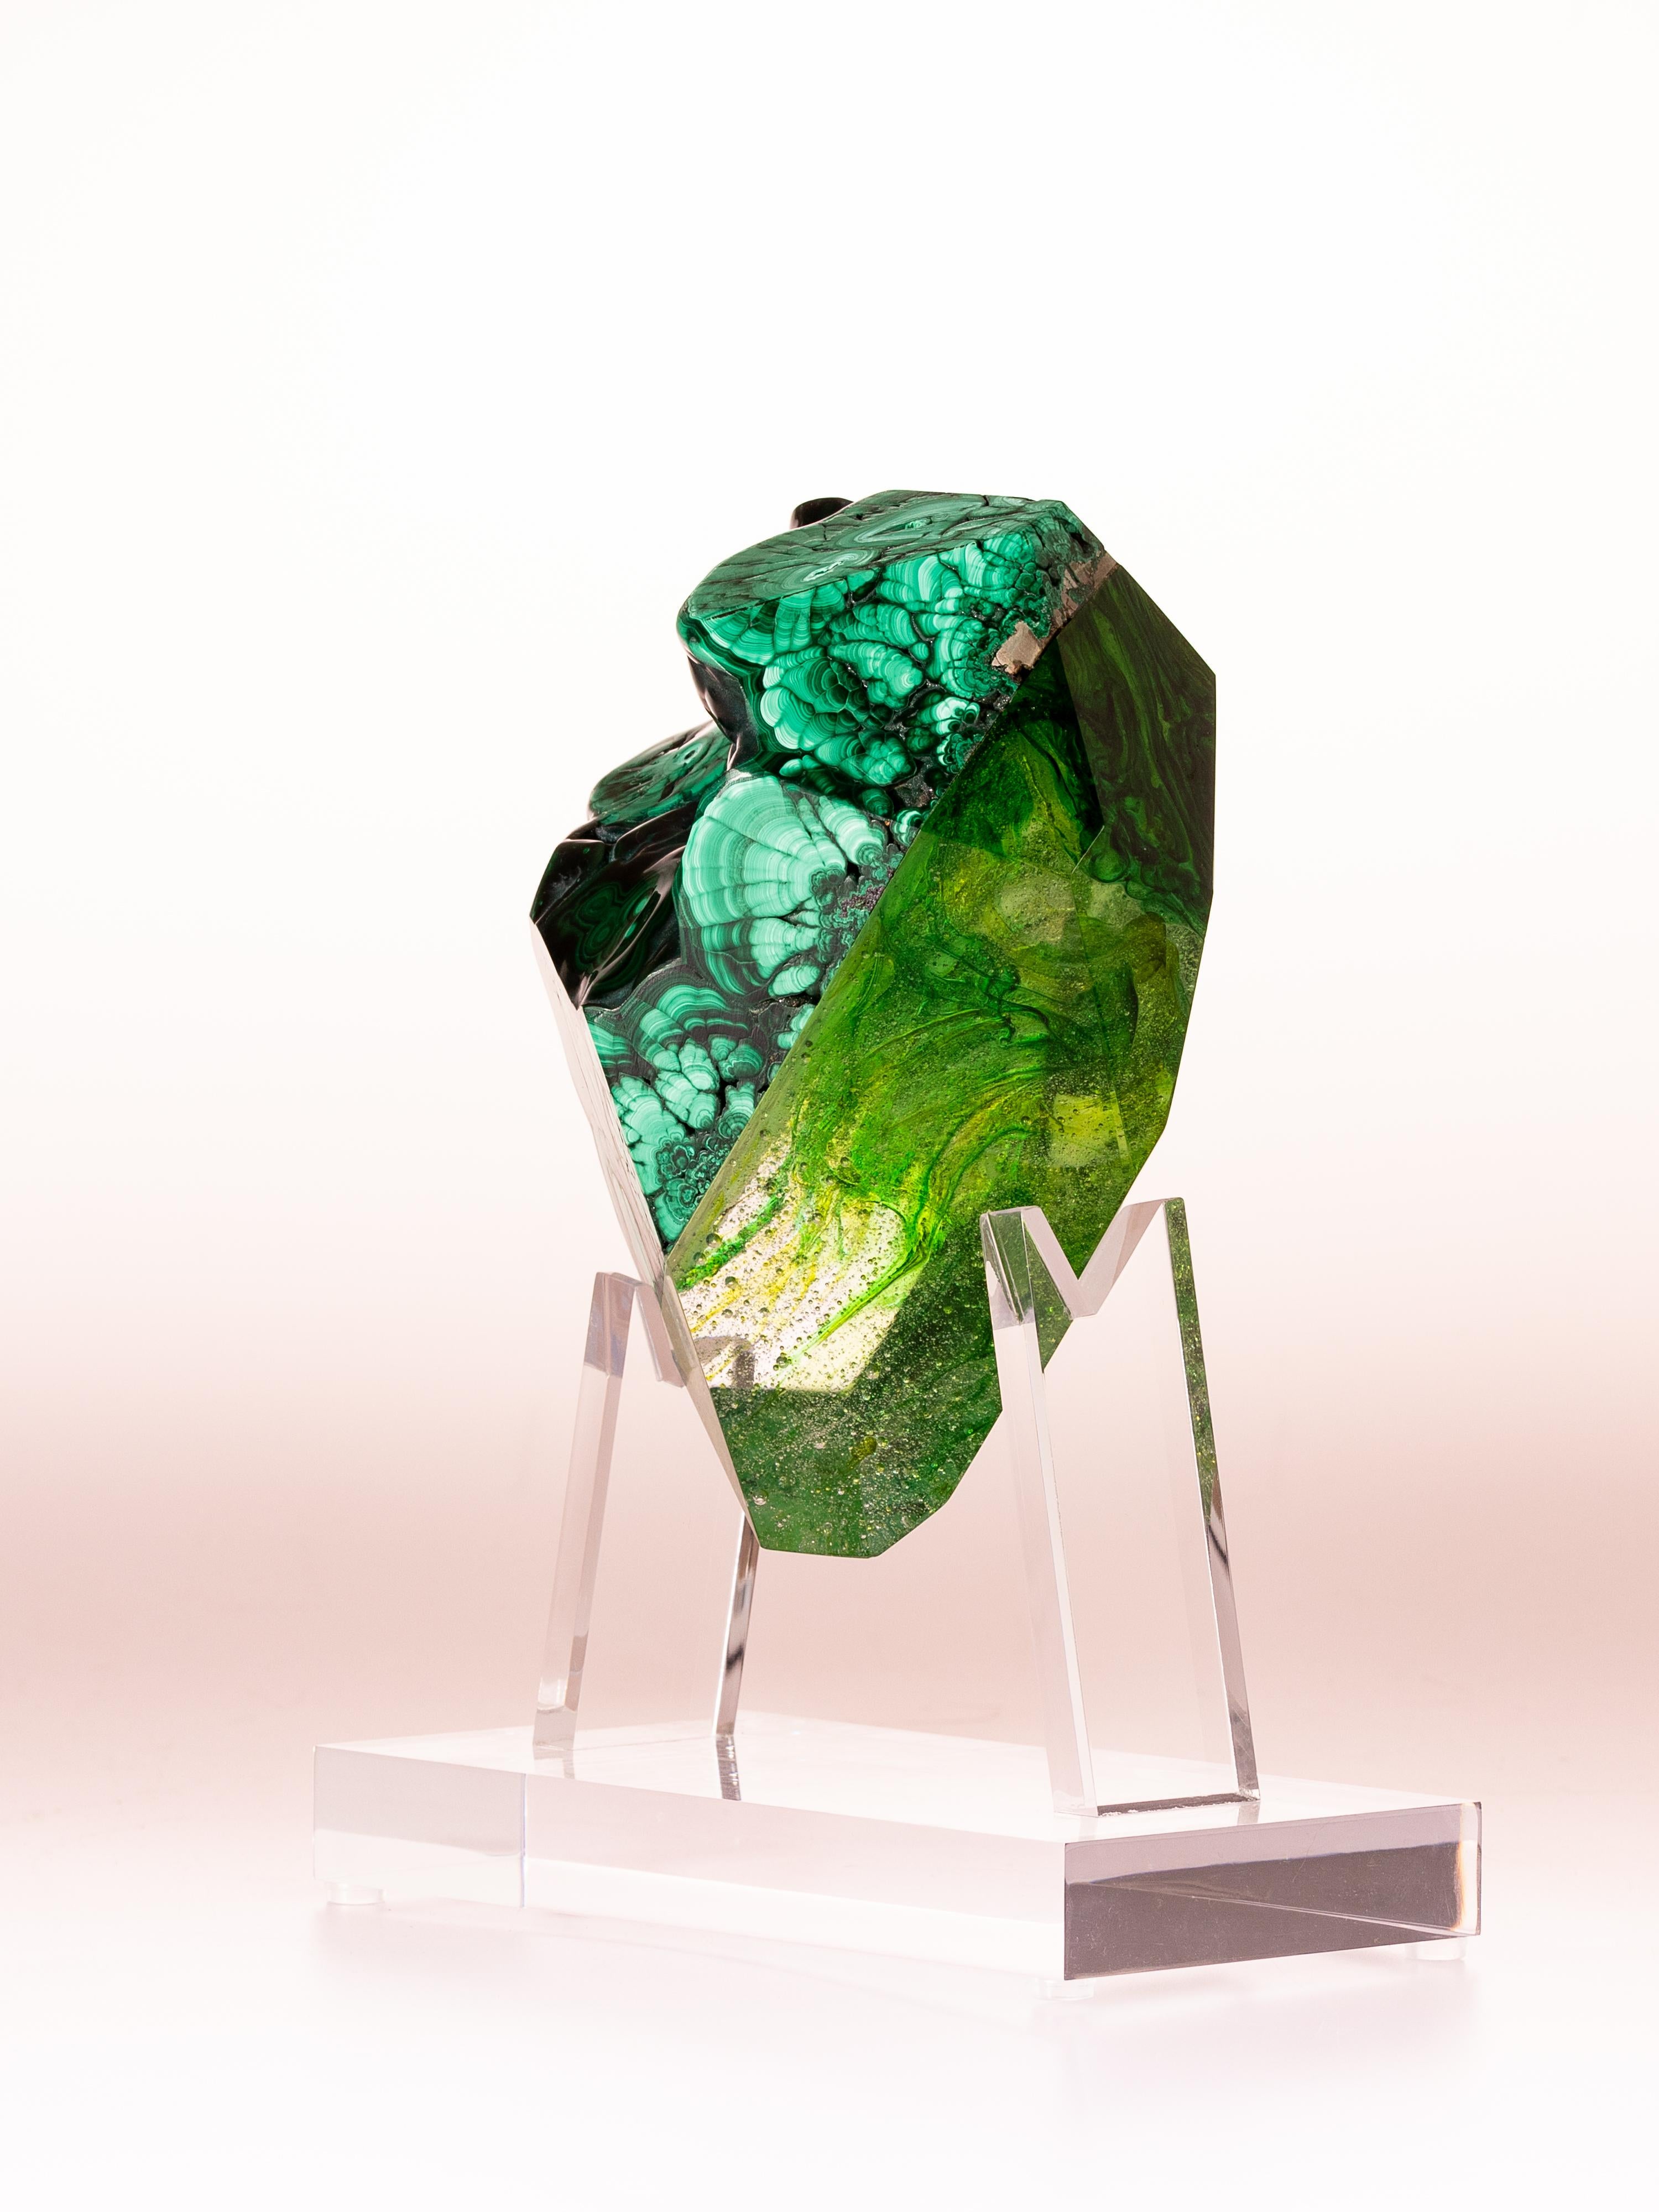 Malachite and glass sculpture collaboration between glass artist Orfeo Quagliata and Pietra Gallery artist Ernesto Duran.
This piece is called 